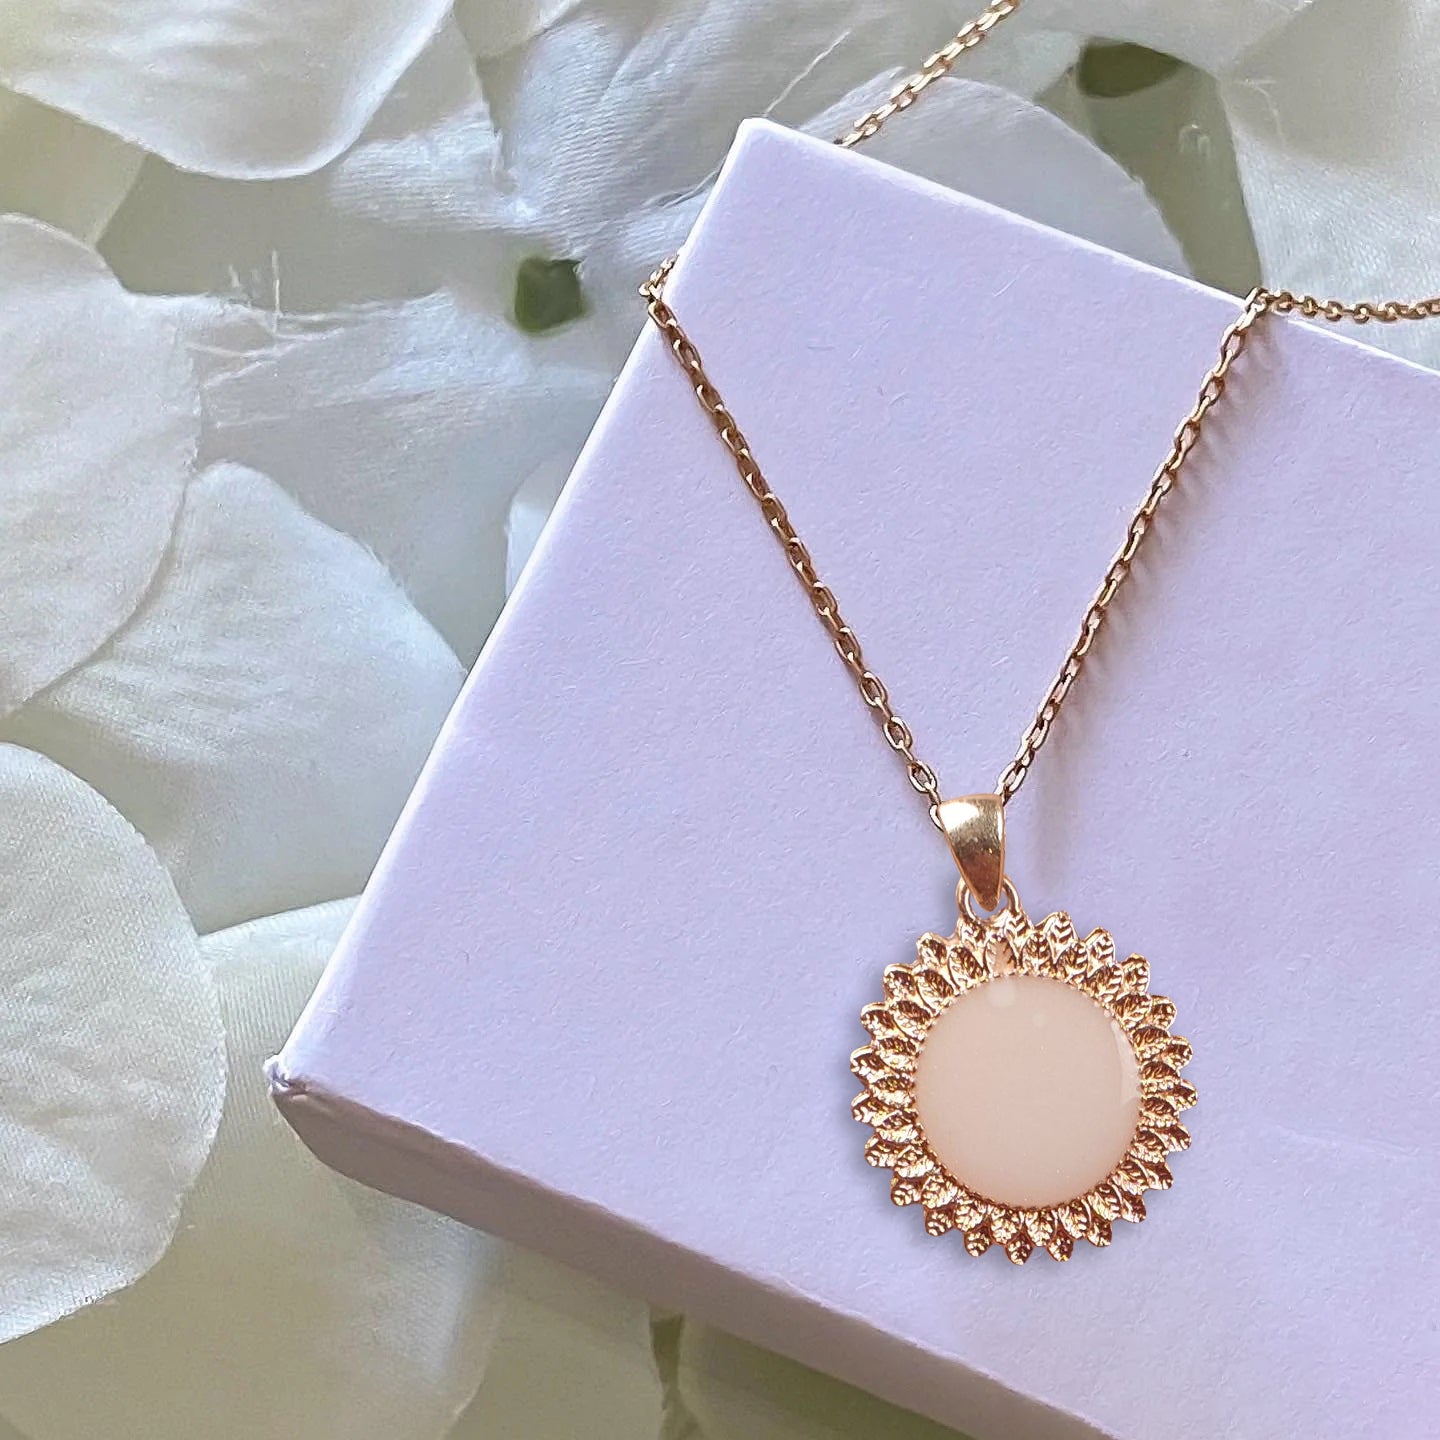 Rosegold Sunflower Pendant with Breastmilk Jewelry Kit